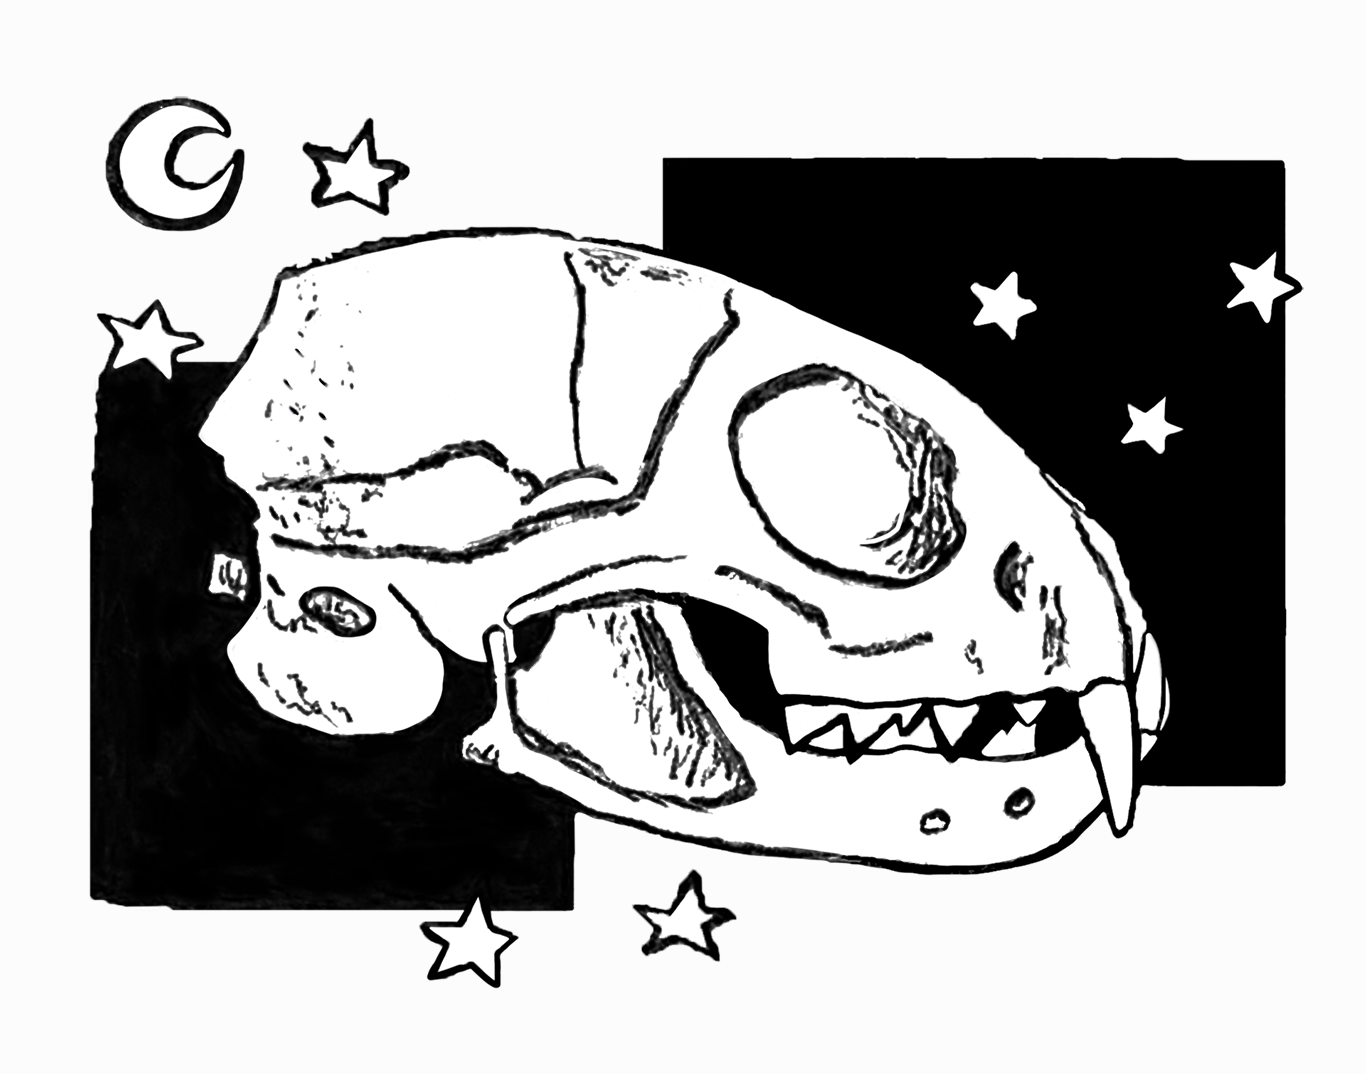 Simply stylized black-and-white drawing of a cat skull with two large black squares of slightly varying sizes behind it, one on the lower left side of the drawing and one on the upper right side, and surrounded by several small white stars and a small white moon. The entire composition is centered on a slightly off-white background.